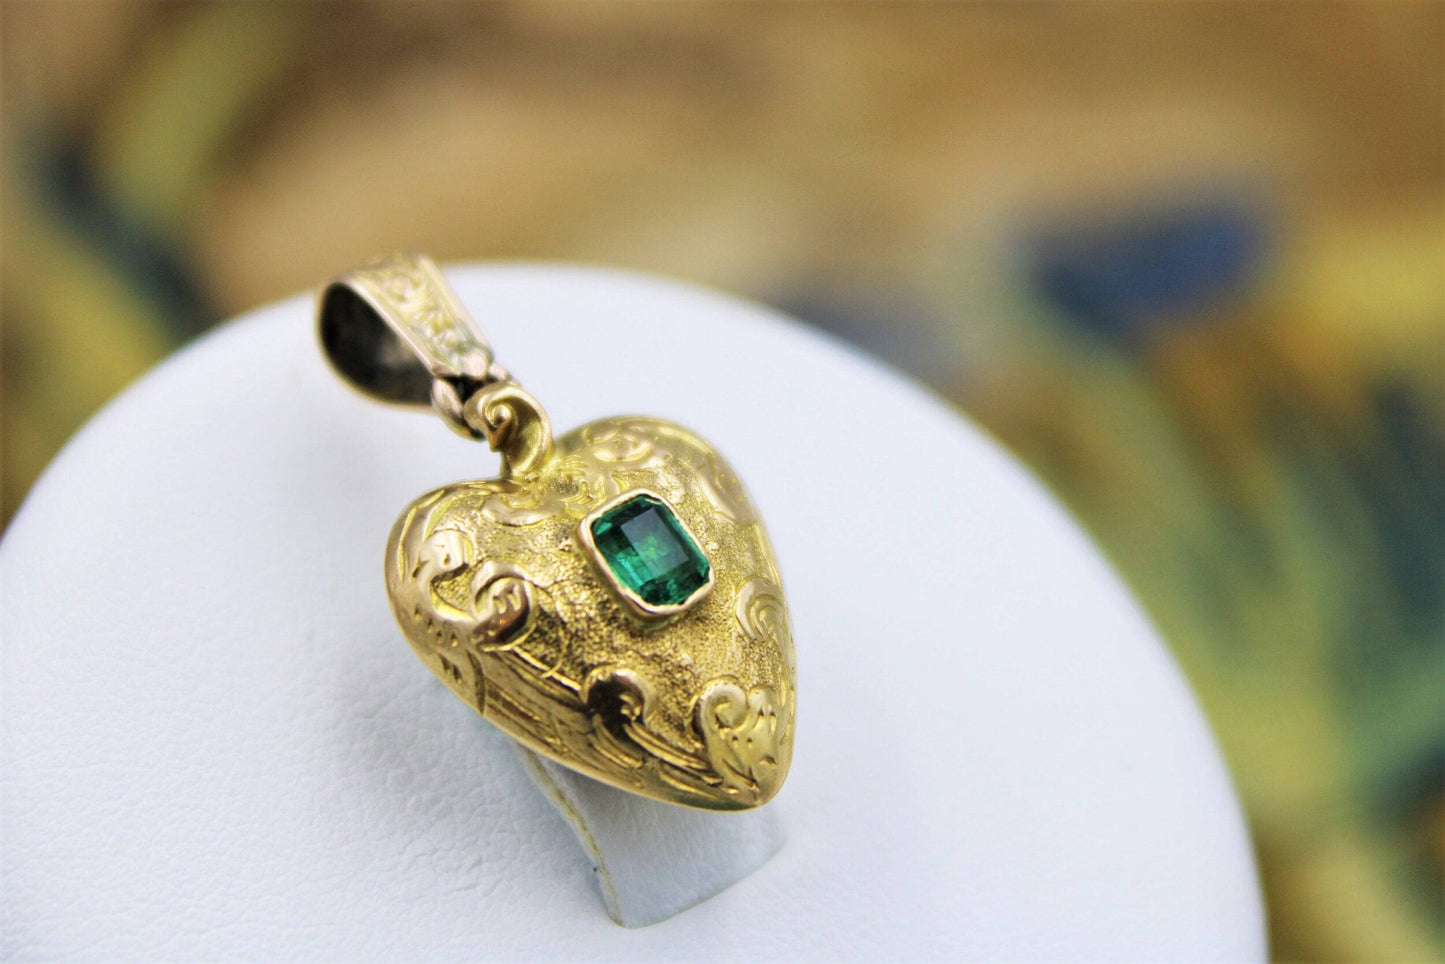 An extremely fine Emerald "Heart" Pendant set in 15 Carat Yellow Gold, English, Circa 1870 - Robin Haydock Antiques